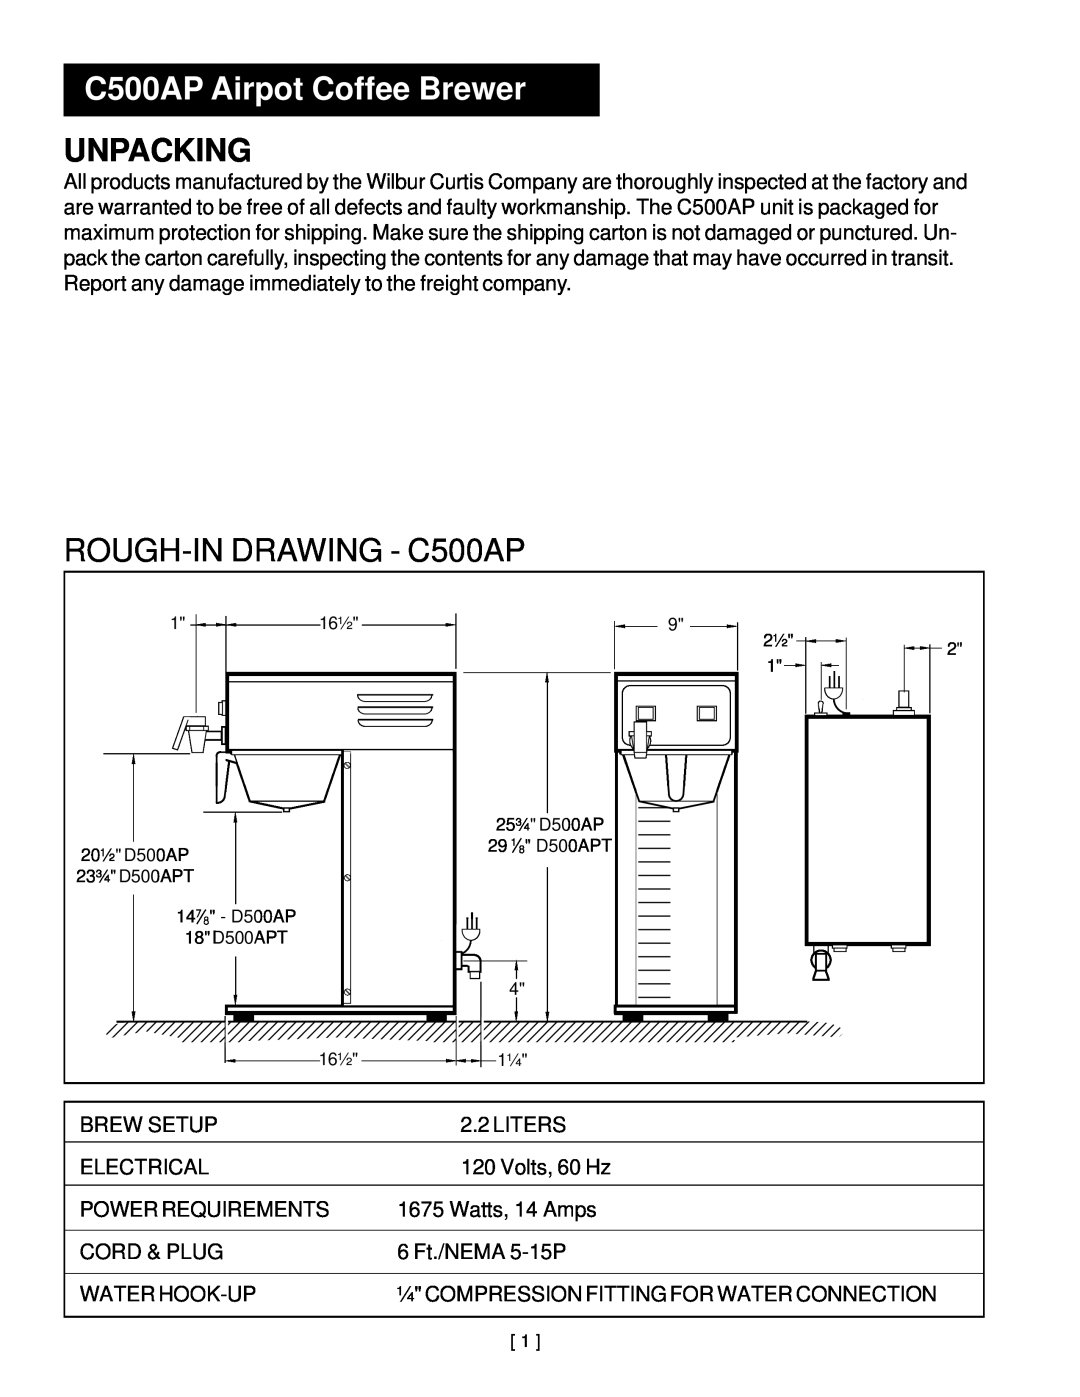 Wibur Curtis Company C500APT service manual C500AP Airpot Coffee Brewer, Unpacking, ROUGH-INDRAWING - C500AP 